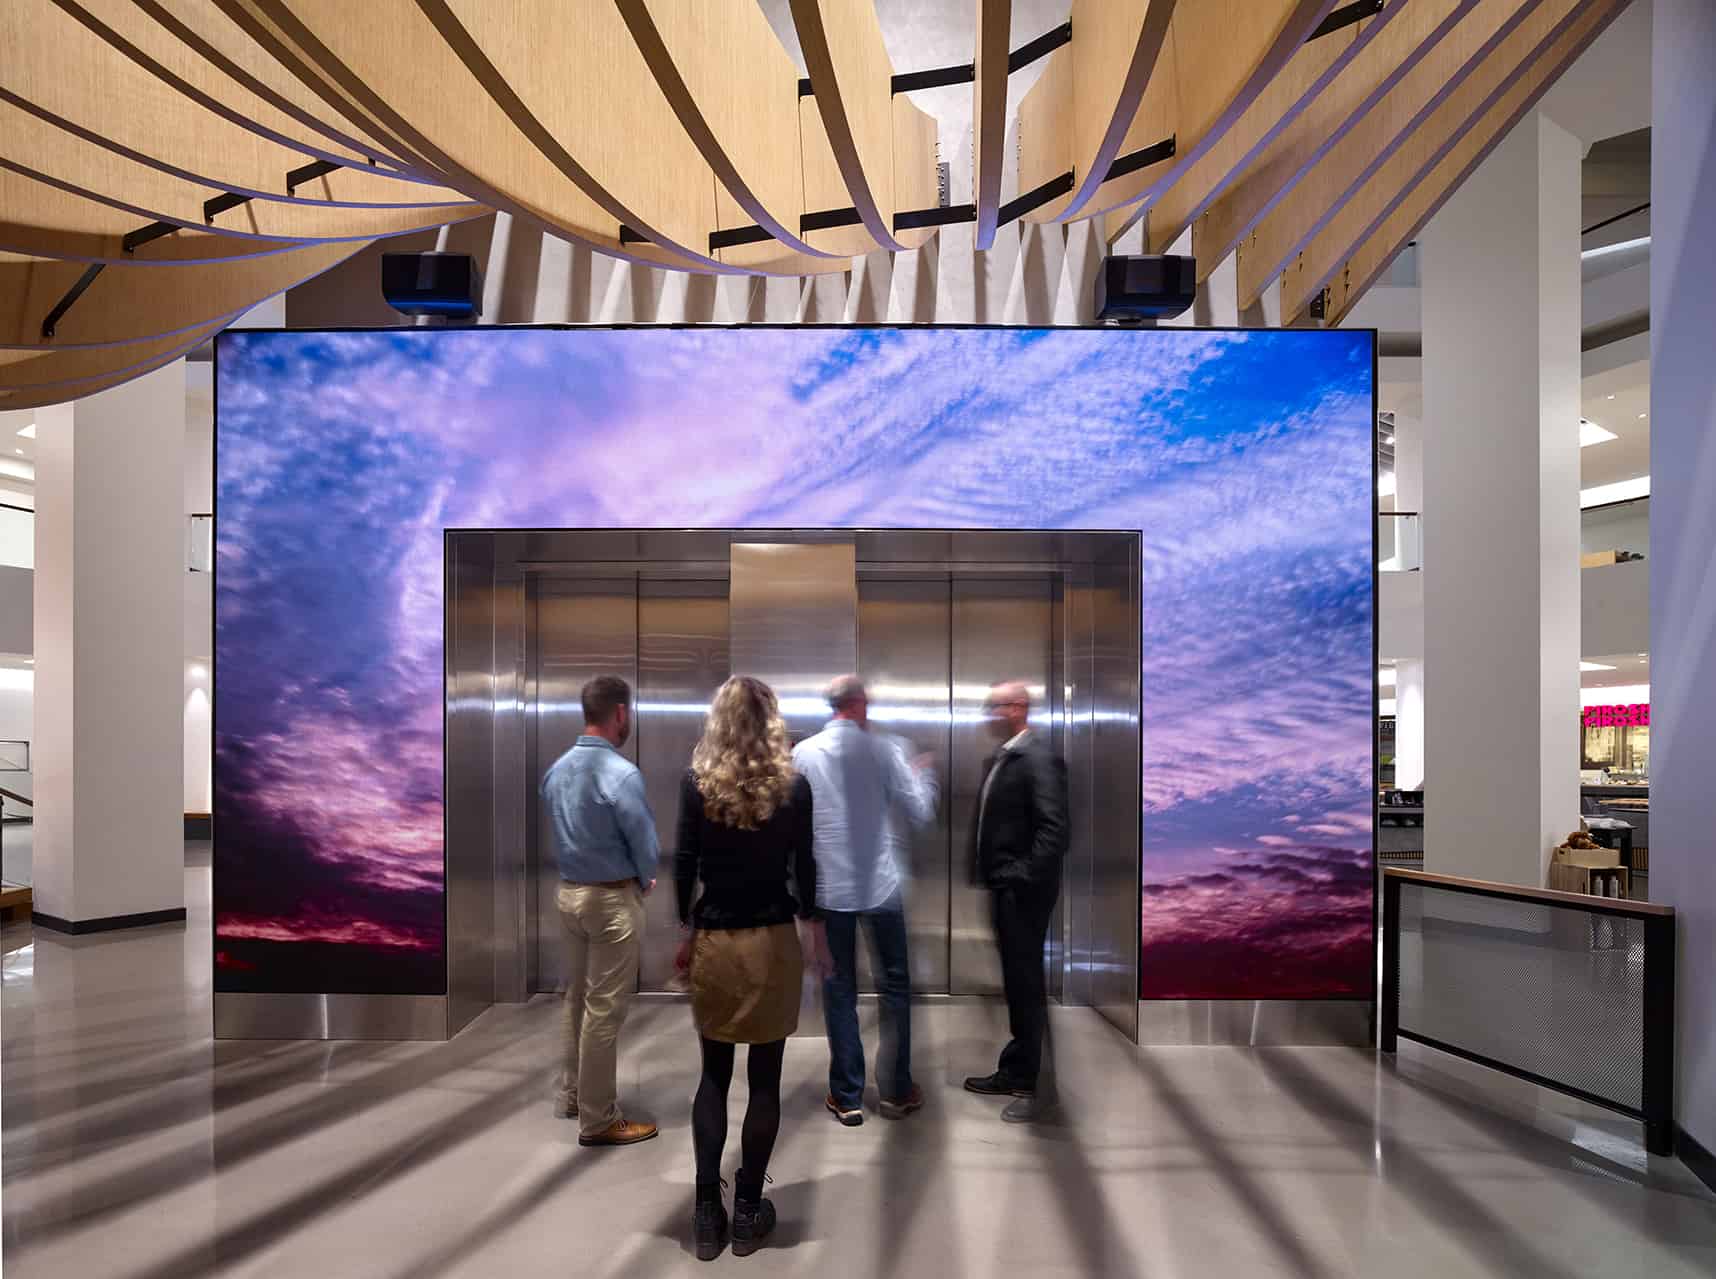 Skyview observatory video wall elevator surround